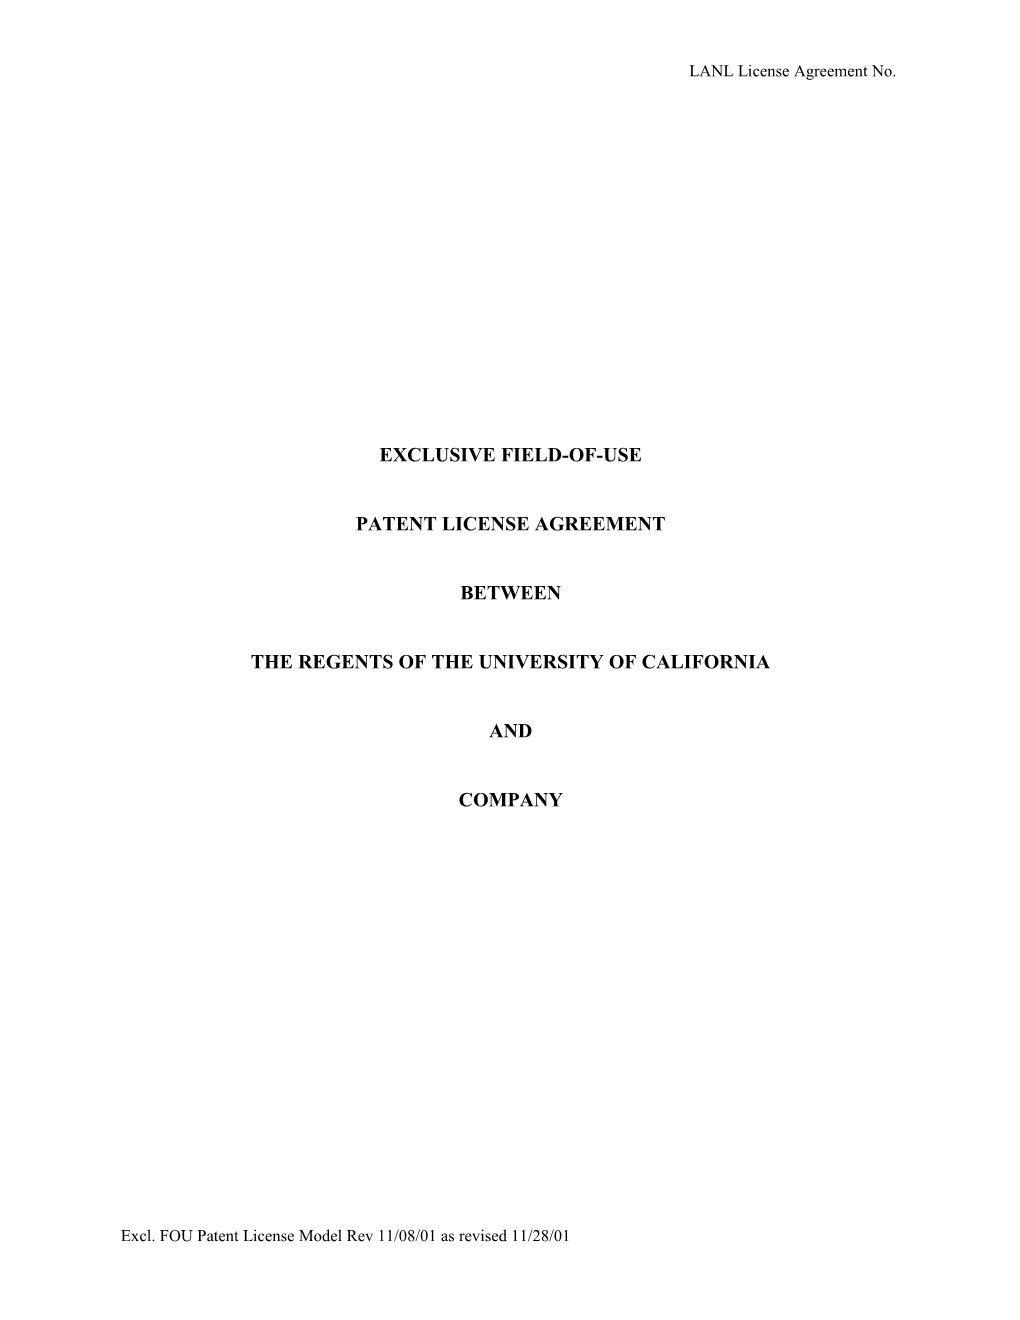 Excl FOU Patent License Agreement, Rev. 11-08-01